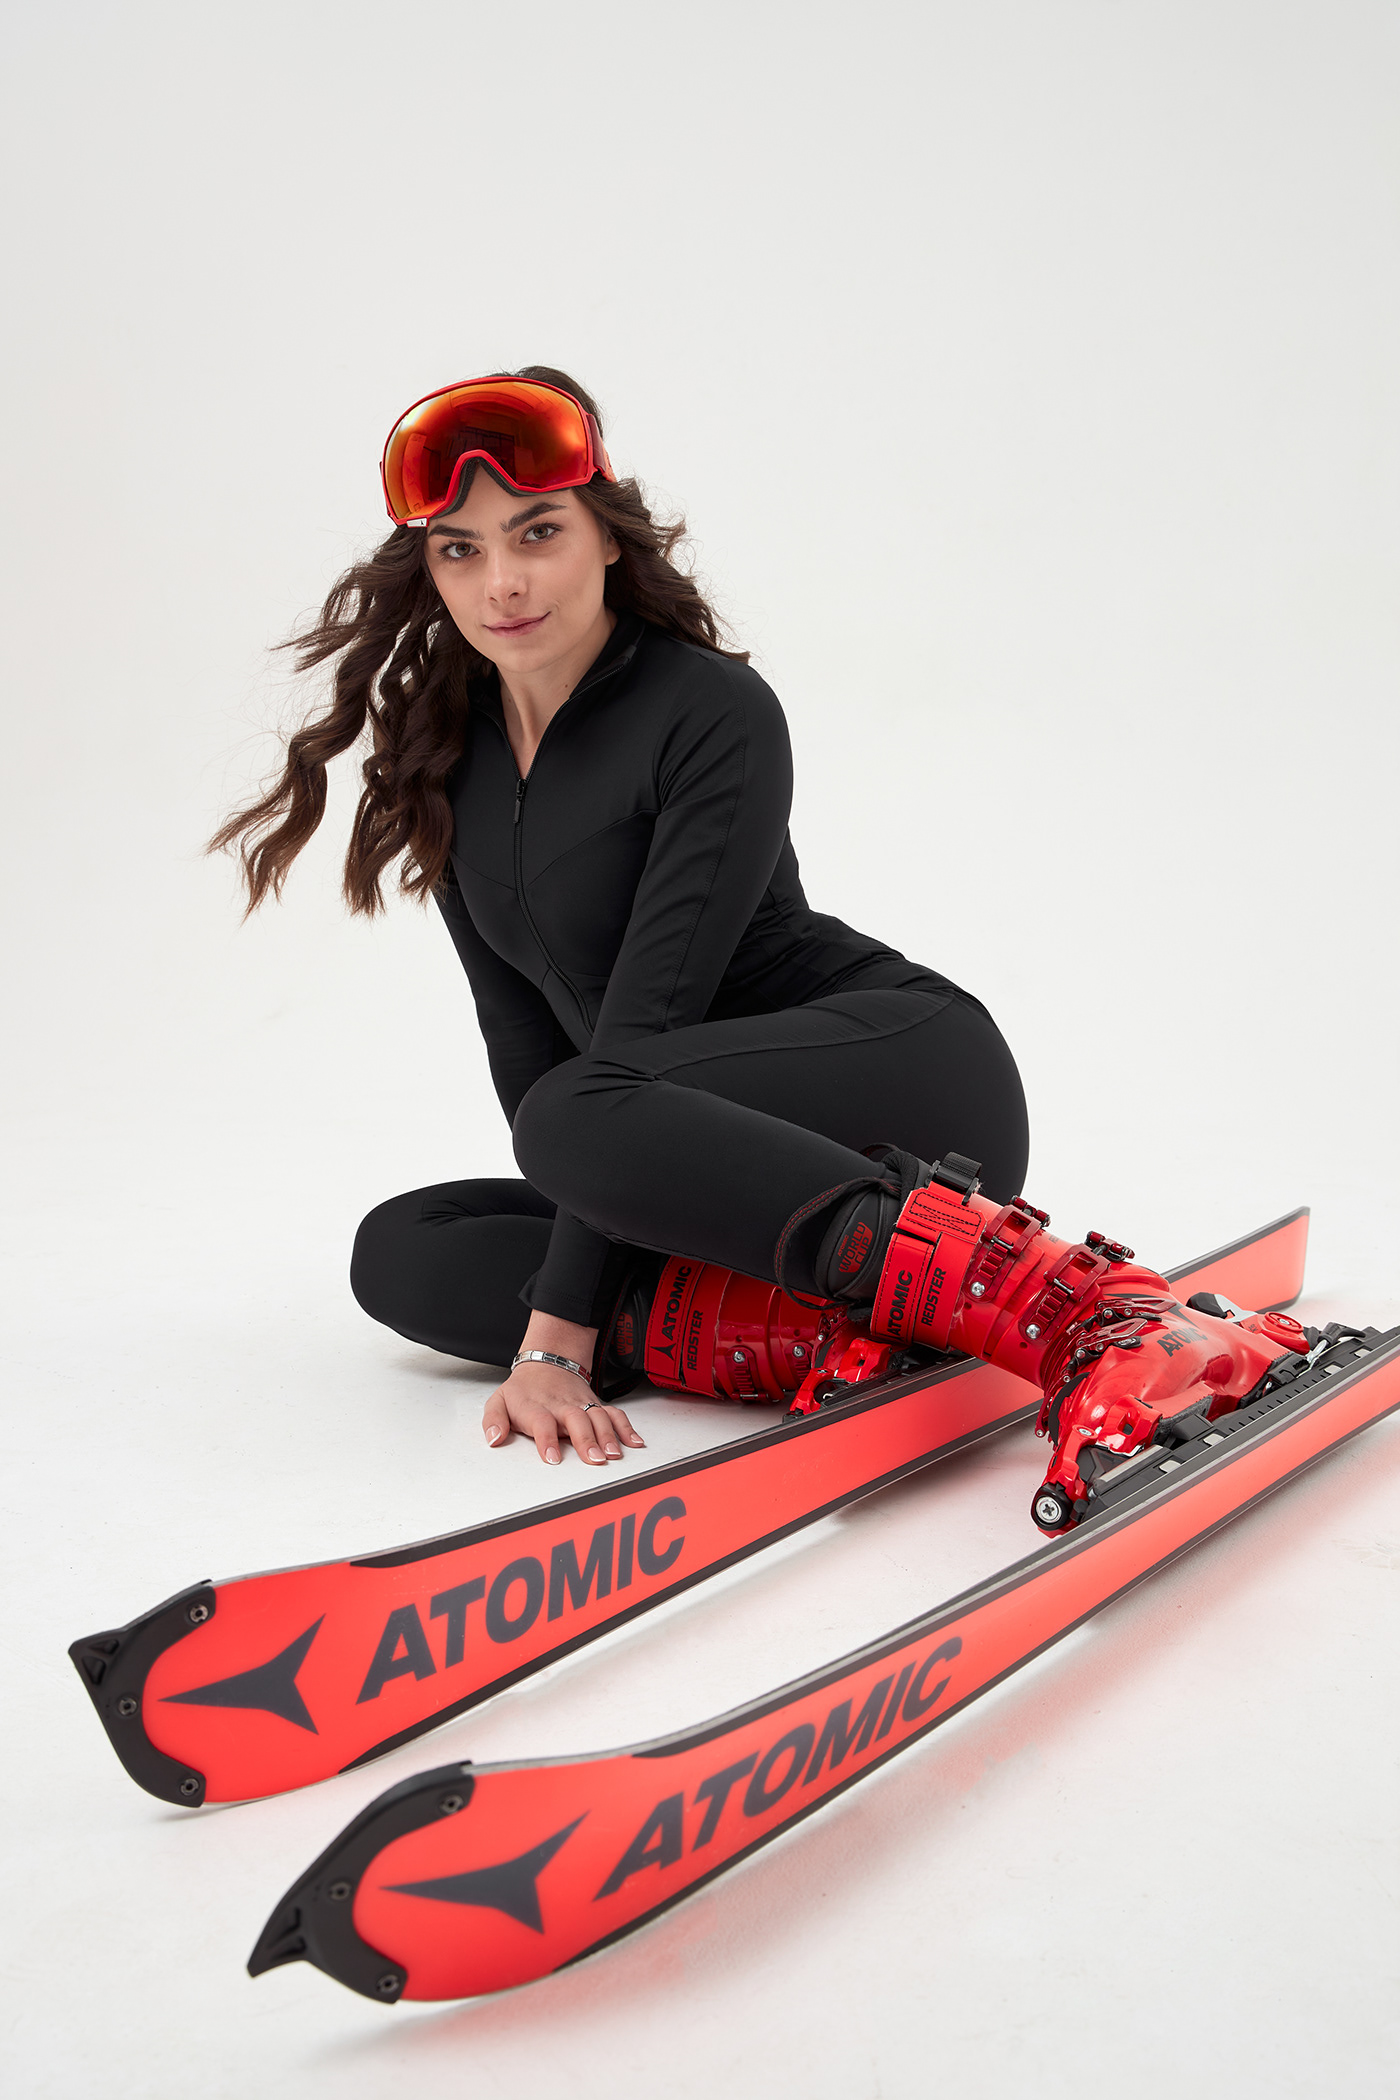 sports photography fashion photography sportsman skier mountain skiing old school red black extreme sports creative photoshoot